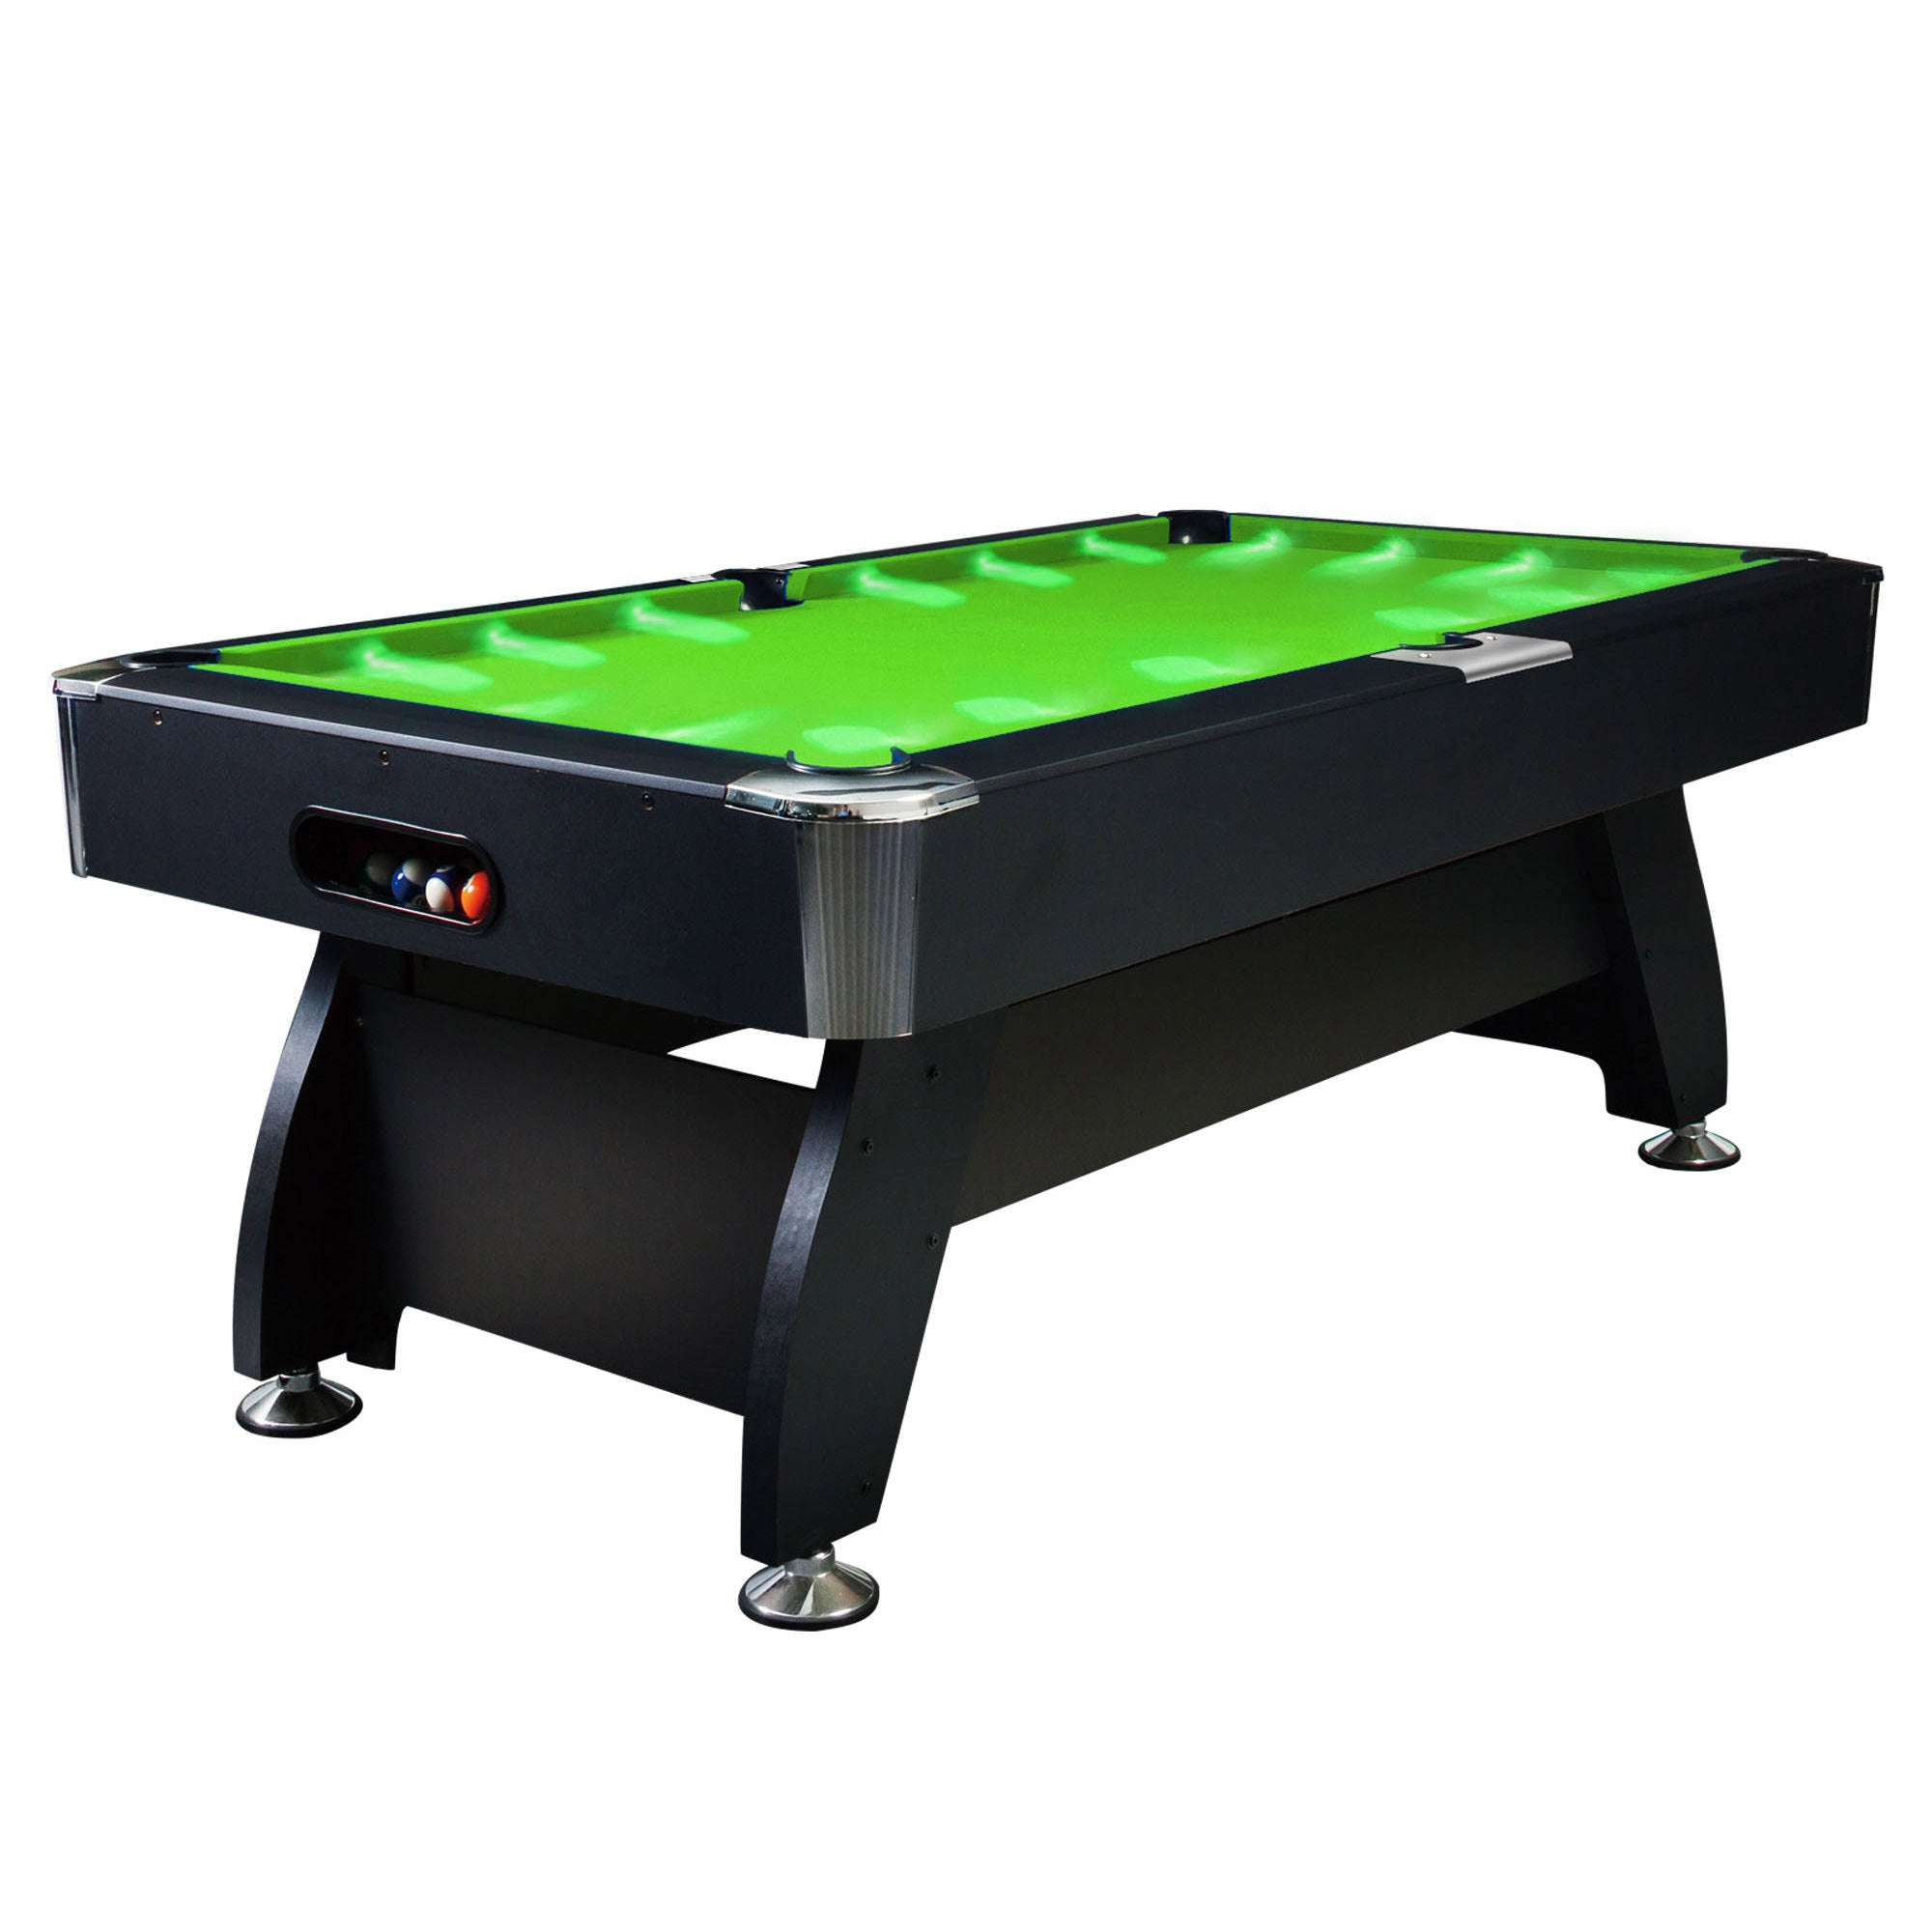 MACE 8FT LED Snooker Billiard Pool Table with Free Accessories